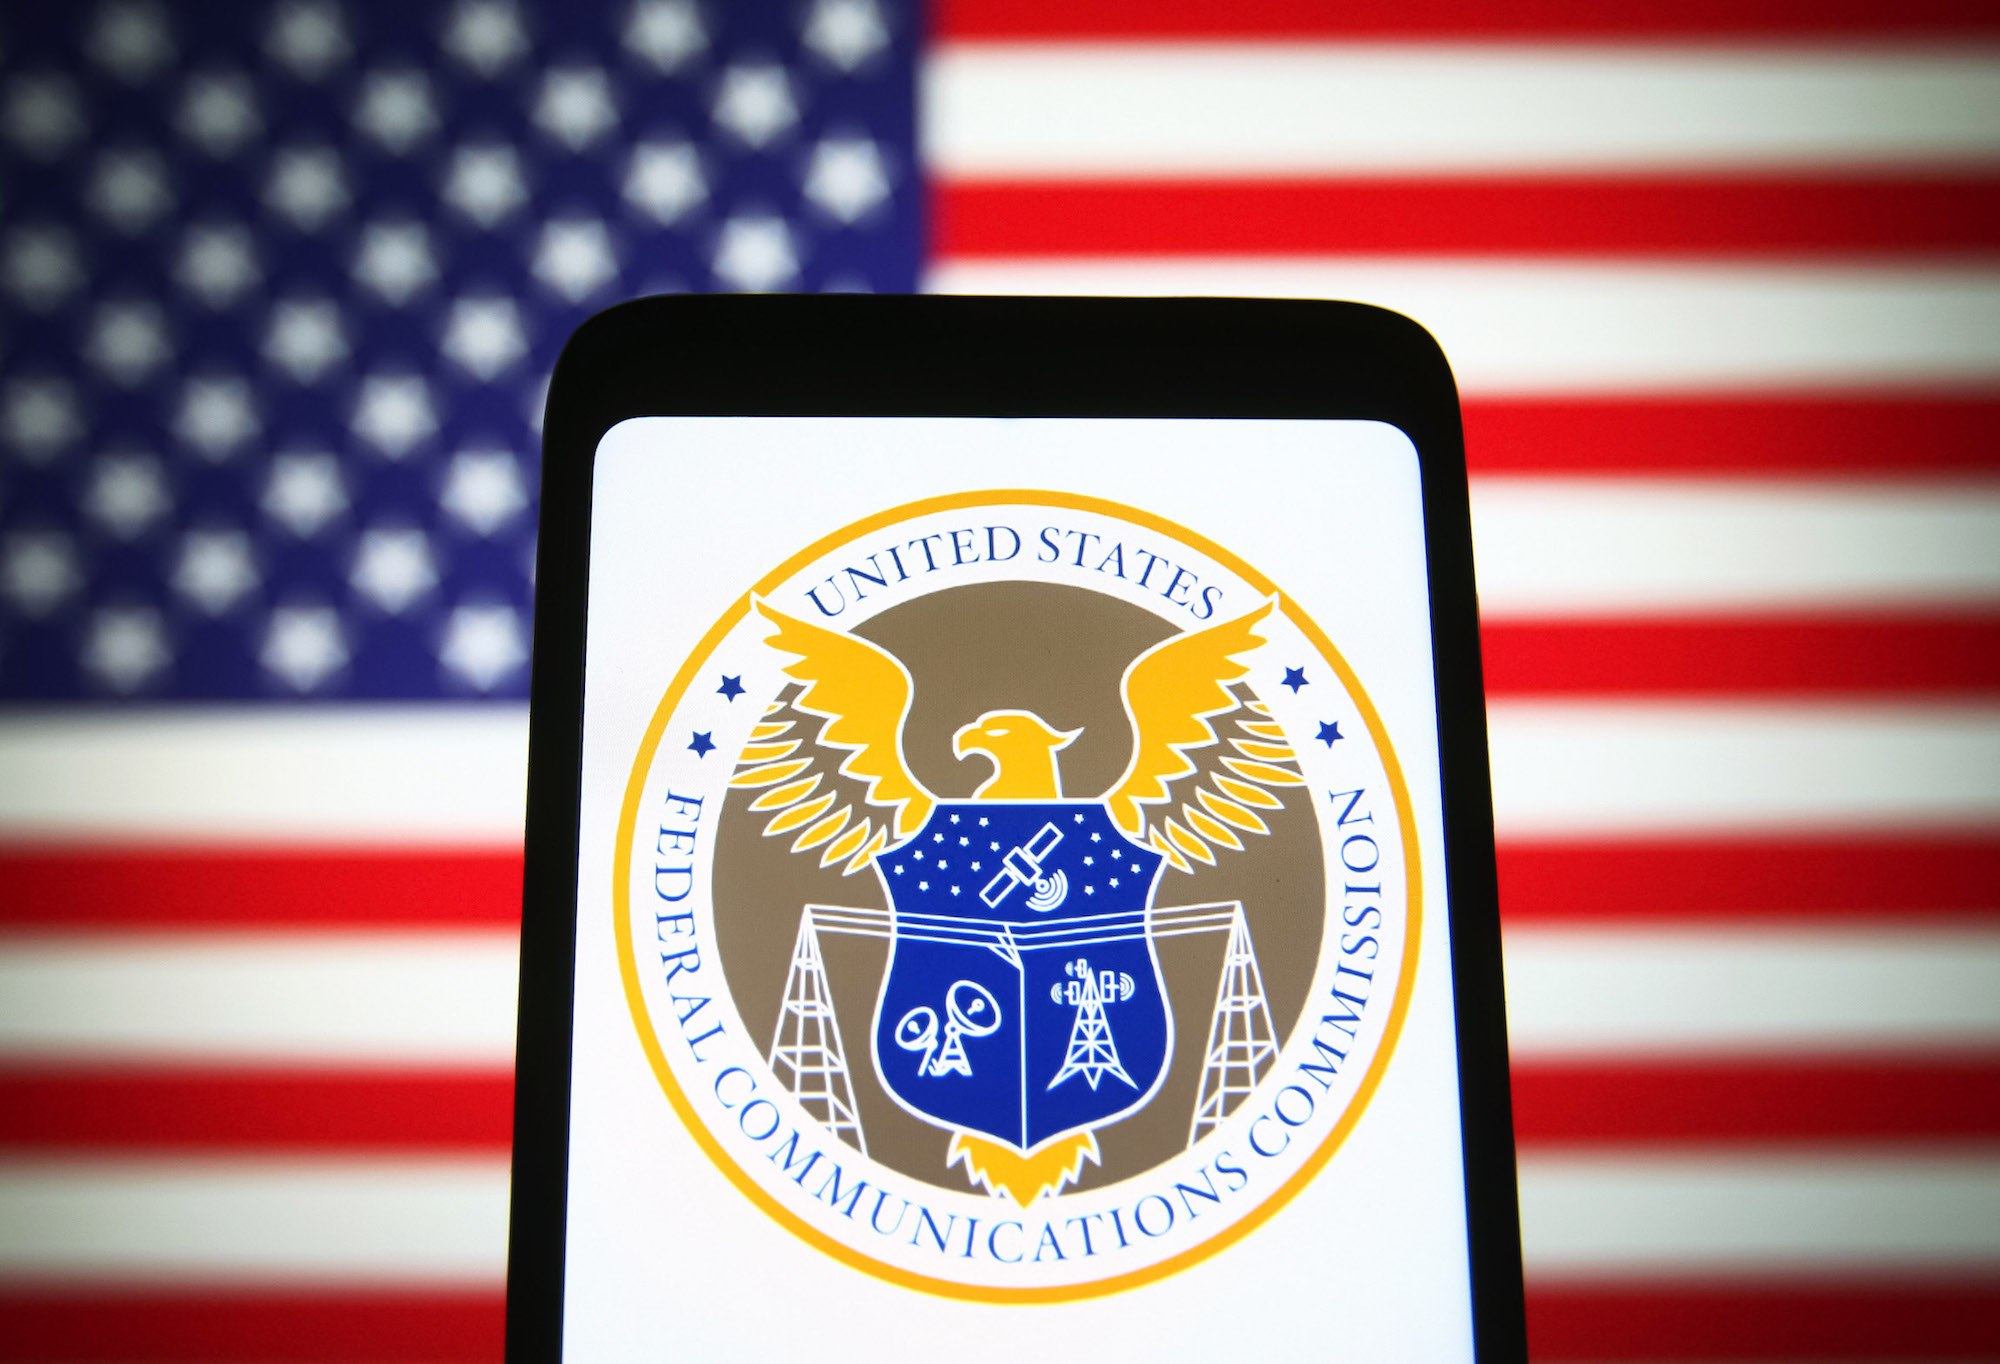 The U.S. Federal Communications Commission (FCC) seal is seen on a smartphone screen with the US flag in the background.